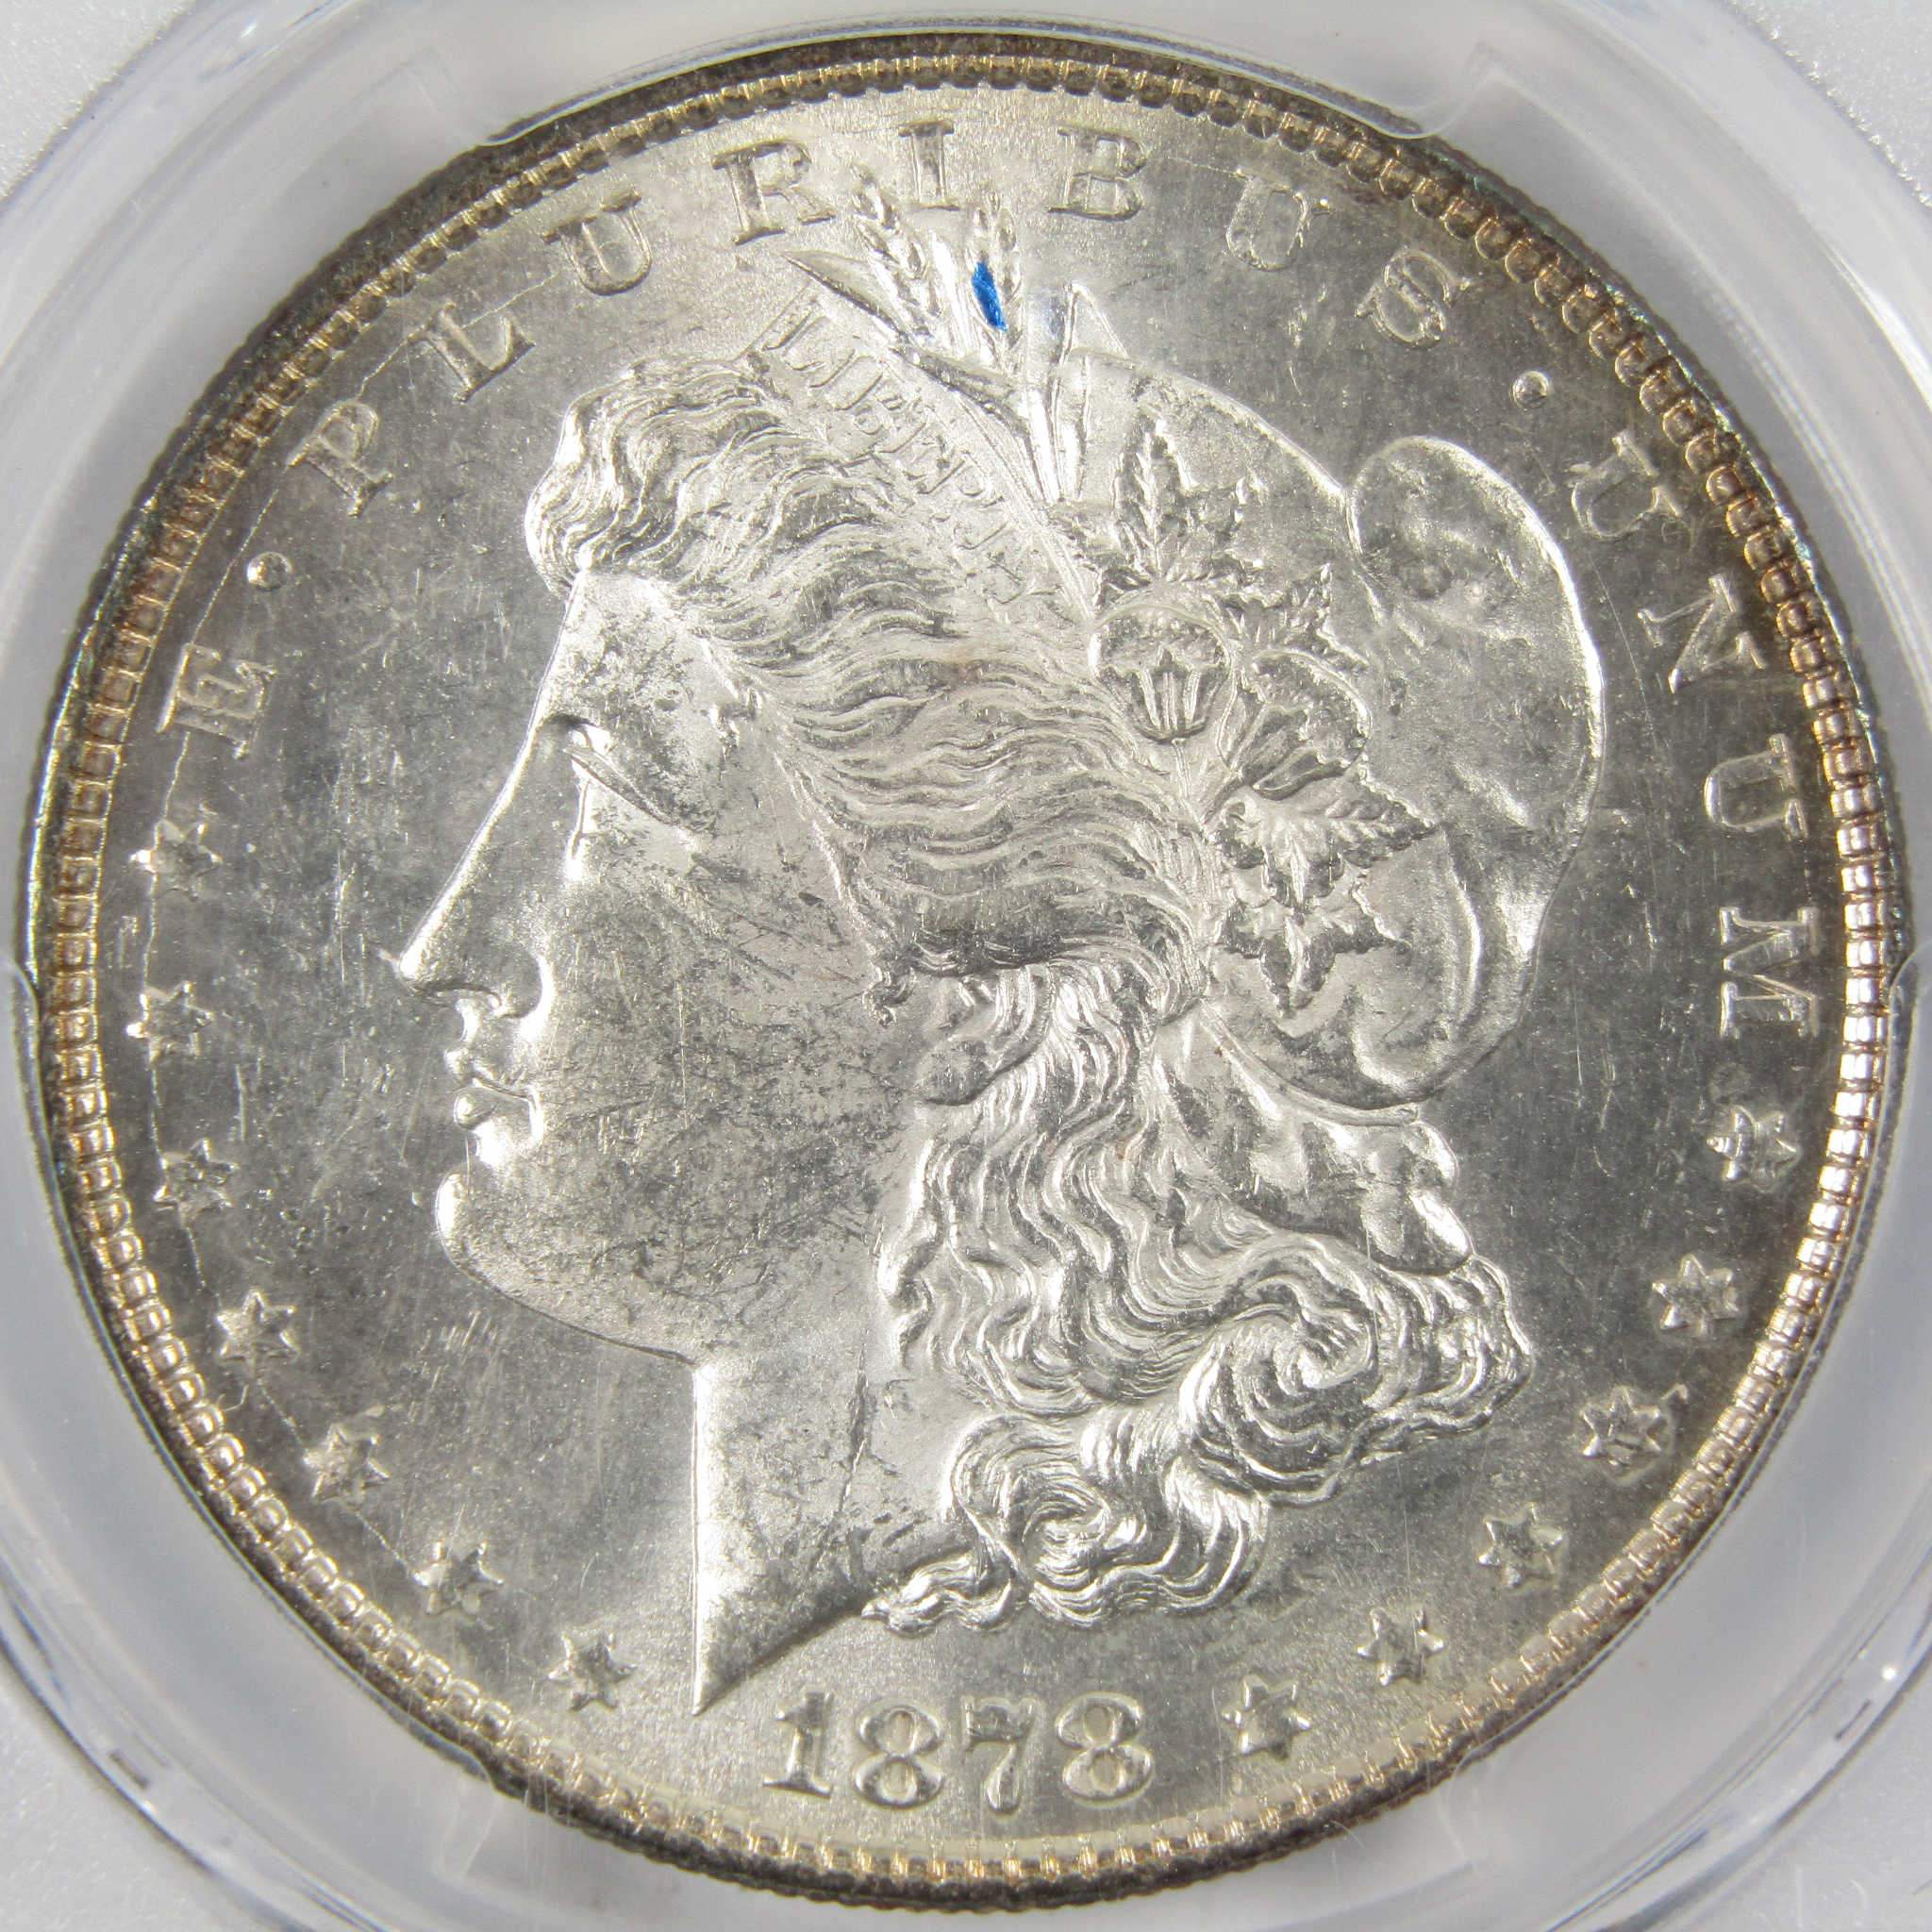 1878 8TF Morgan Dollar MS 62 PCGS 90% Silver $1 Coin SKU:I9733 - Morgan coin - Morgan silver dollar - Morgan silver dollar for sale - Profile Coins &amp; Collectibles